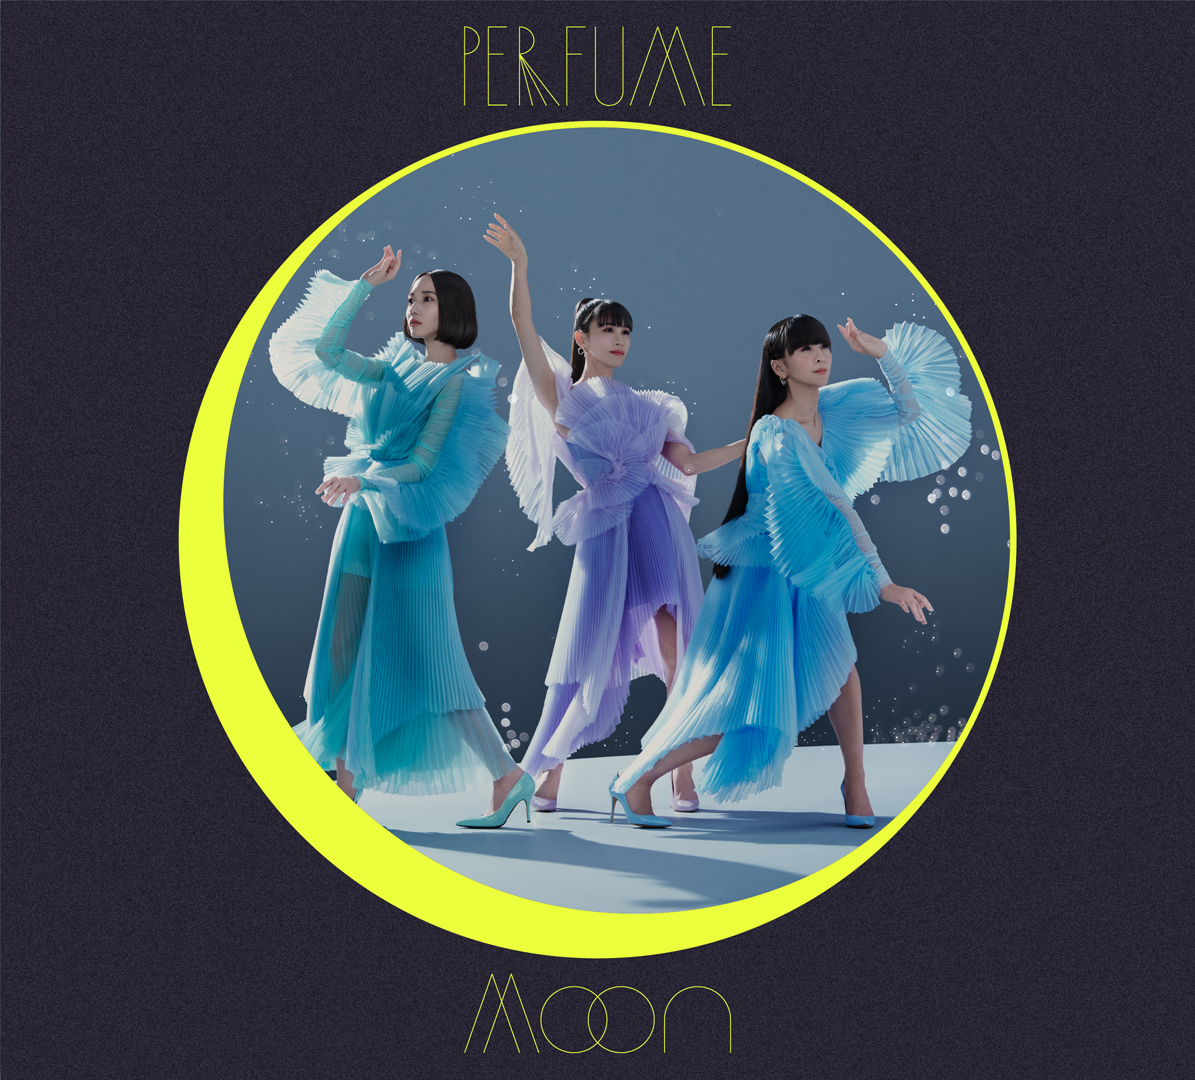 Moon ｜ Discography ｜ Perfume Official Site